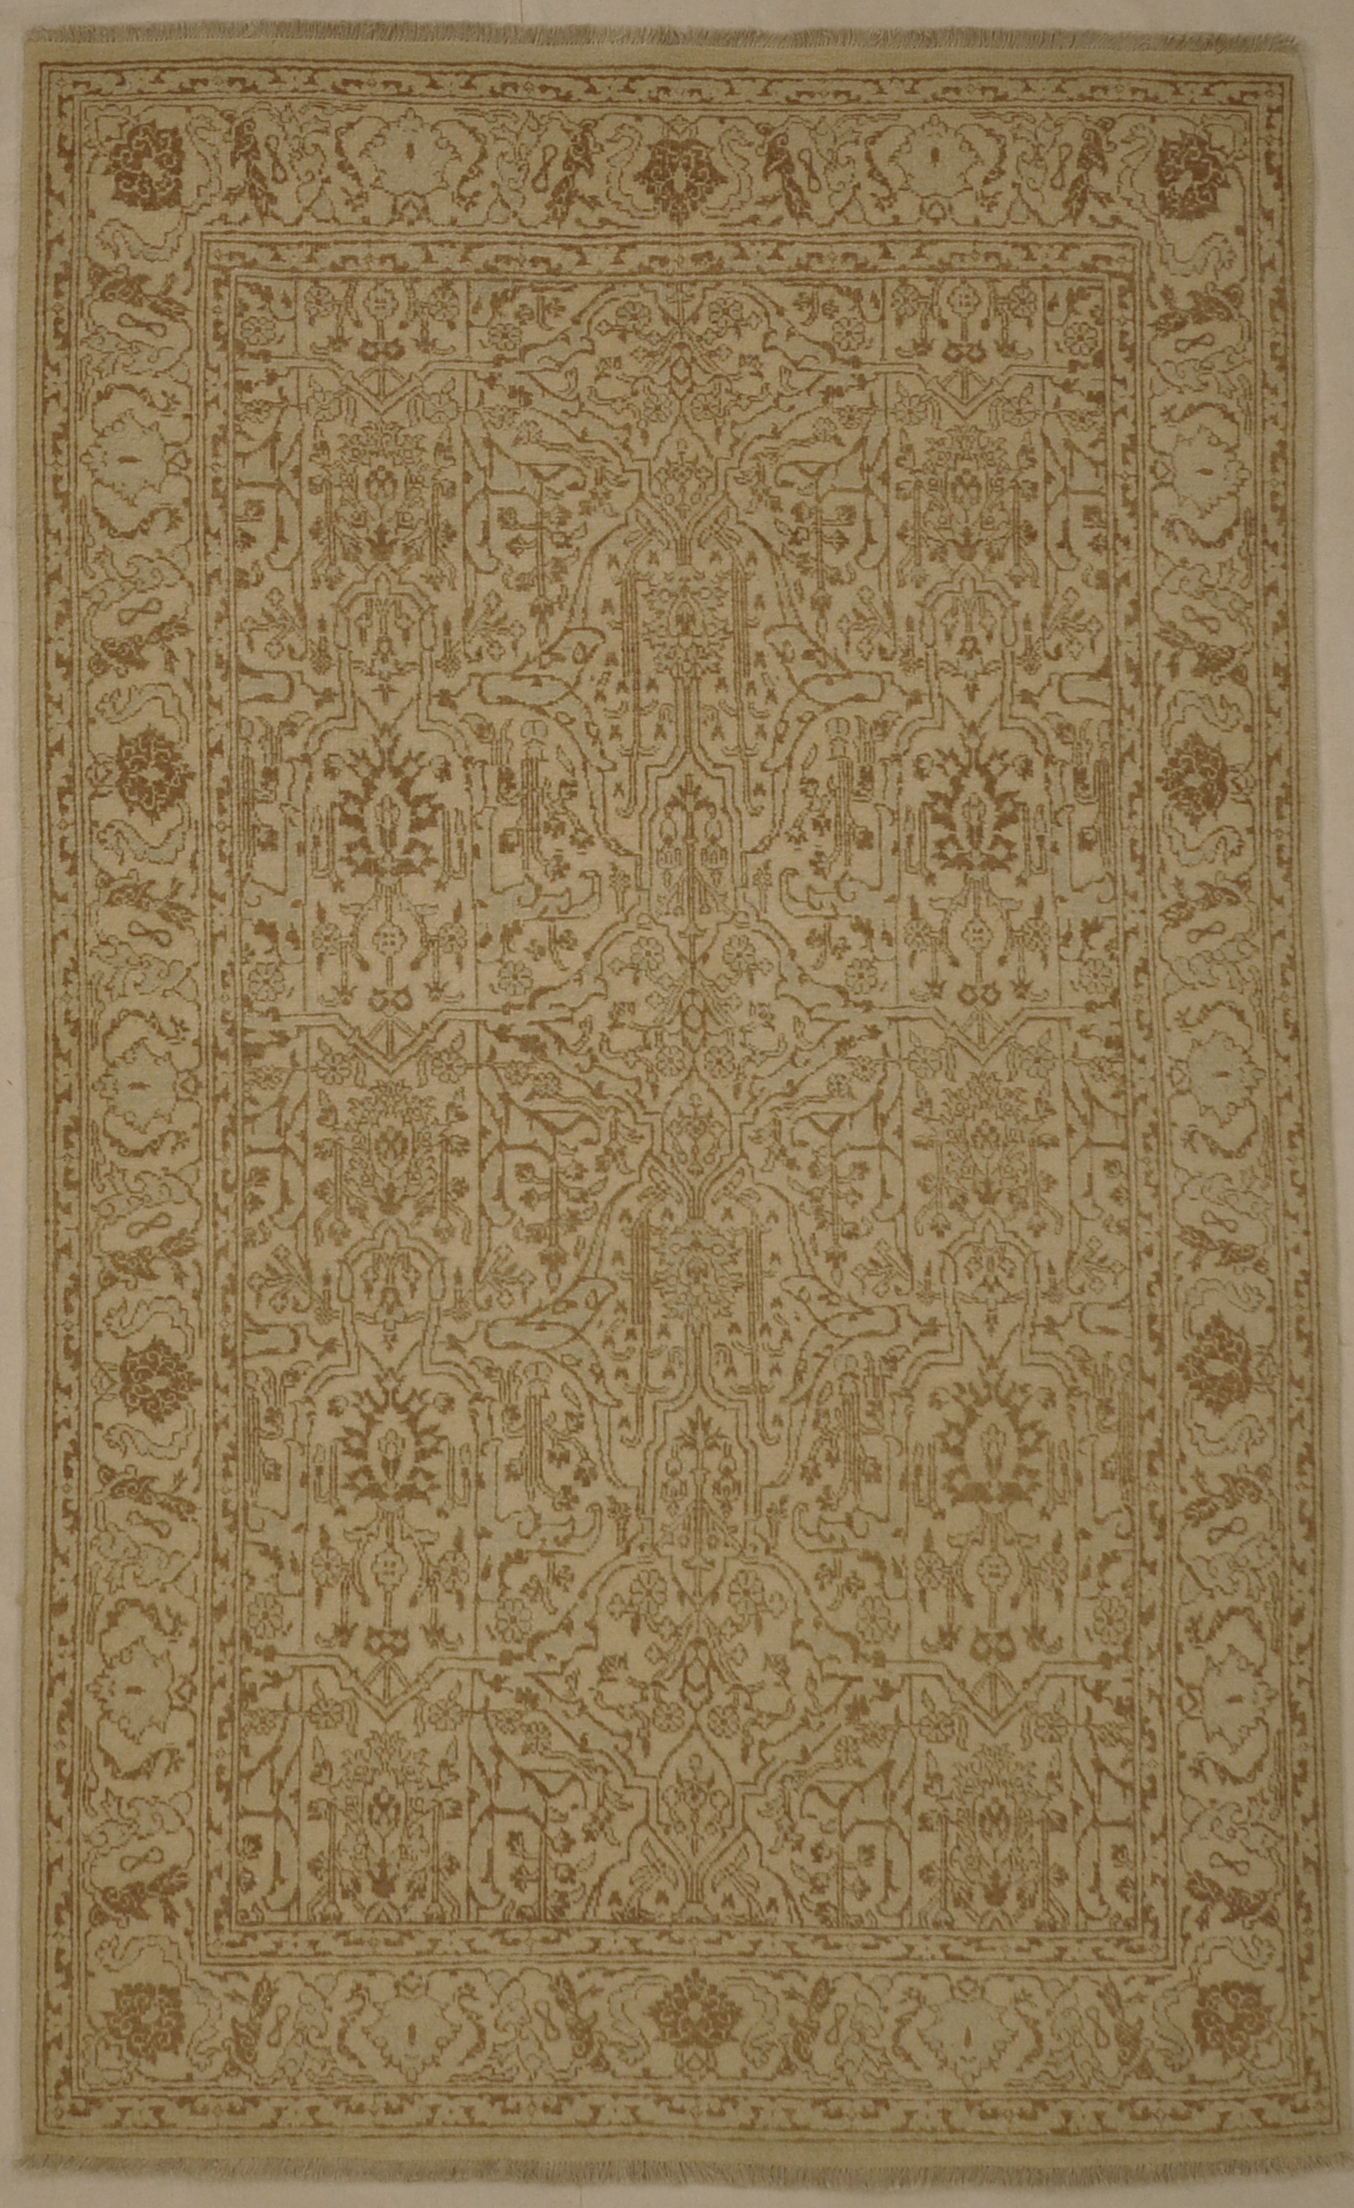 Antique Ivory on Ivory Larestan Rug. A piece of genuine woven carpet art sold by Santa Barbara Design Center Rugs and More.